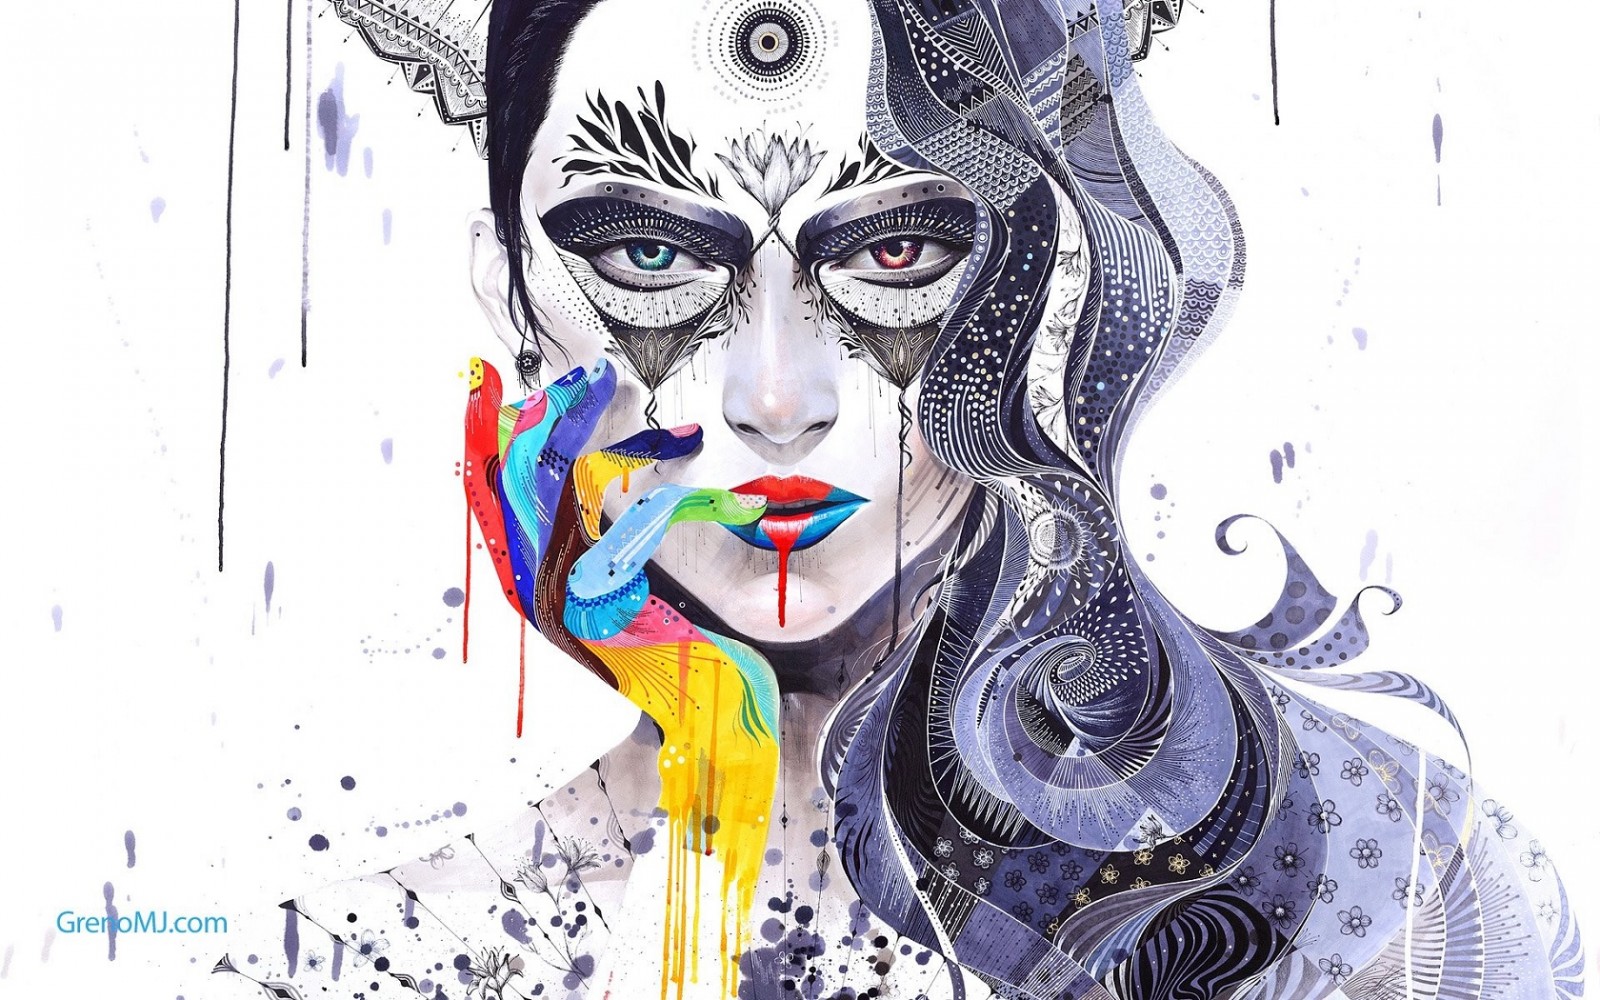 face, drawing, colorful, painting, illustration, digital art, women, portrait, long hair, abstract, artwork, selective coloring, white background, surreal, cartoon, finger on lips, paint splatter, Minjae Lee, mosaic, ART, sketch High quality